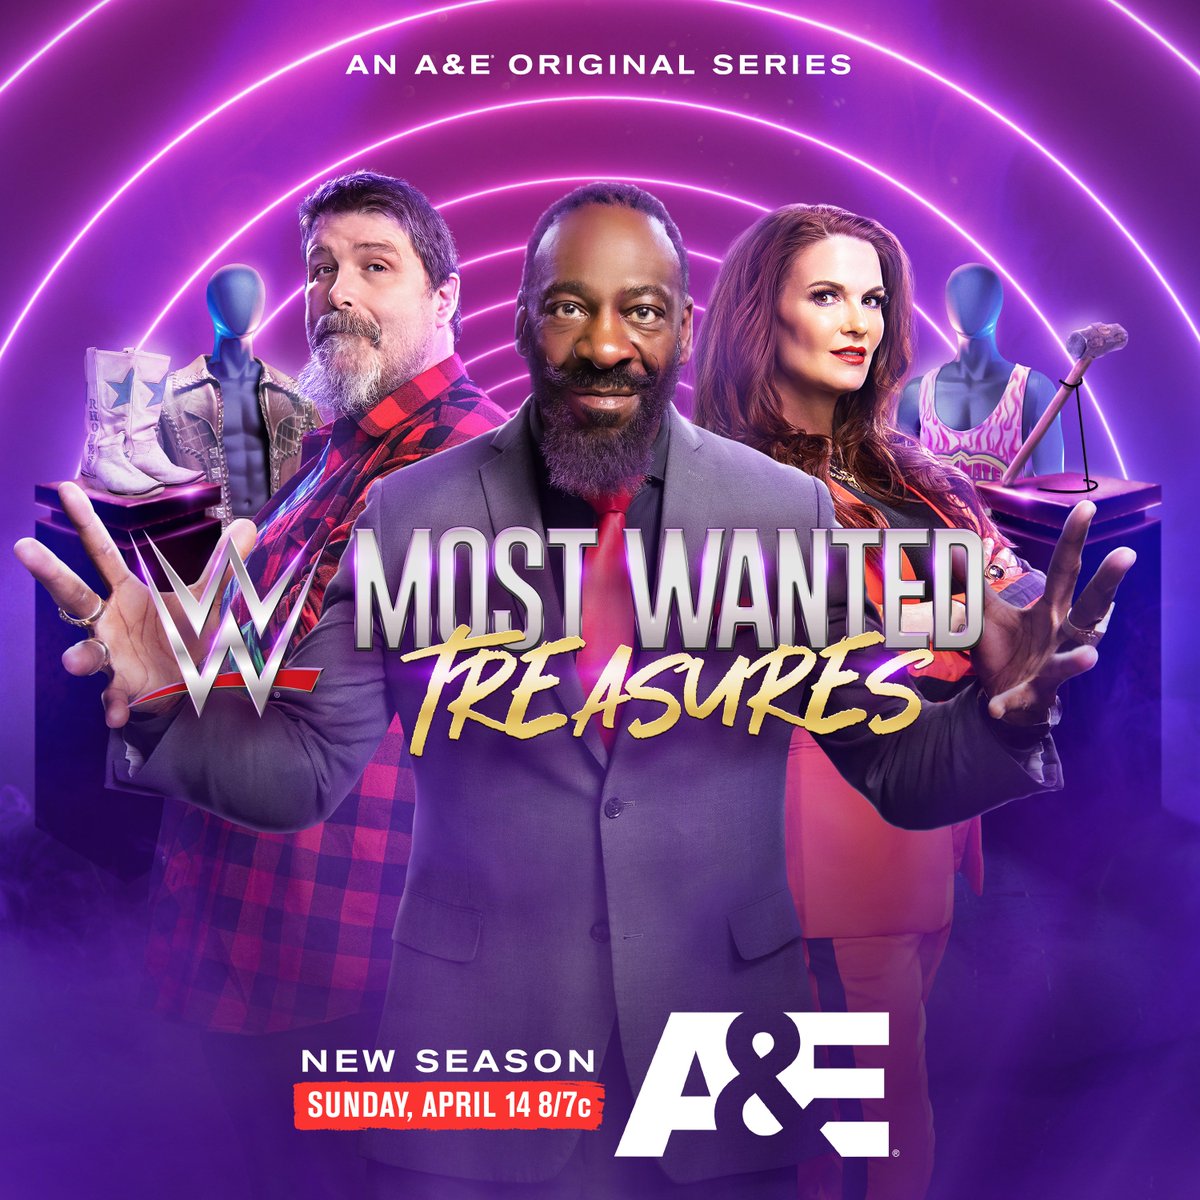 WWE's Most Wanted Treasures is BACK with all-new episodes! Catch the 2-HOUR season premiere this Sunday at 8/7c as part of WWE Superstar Sunday on @AETV. #WWEonAE